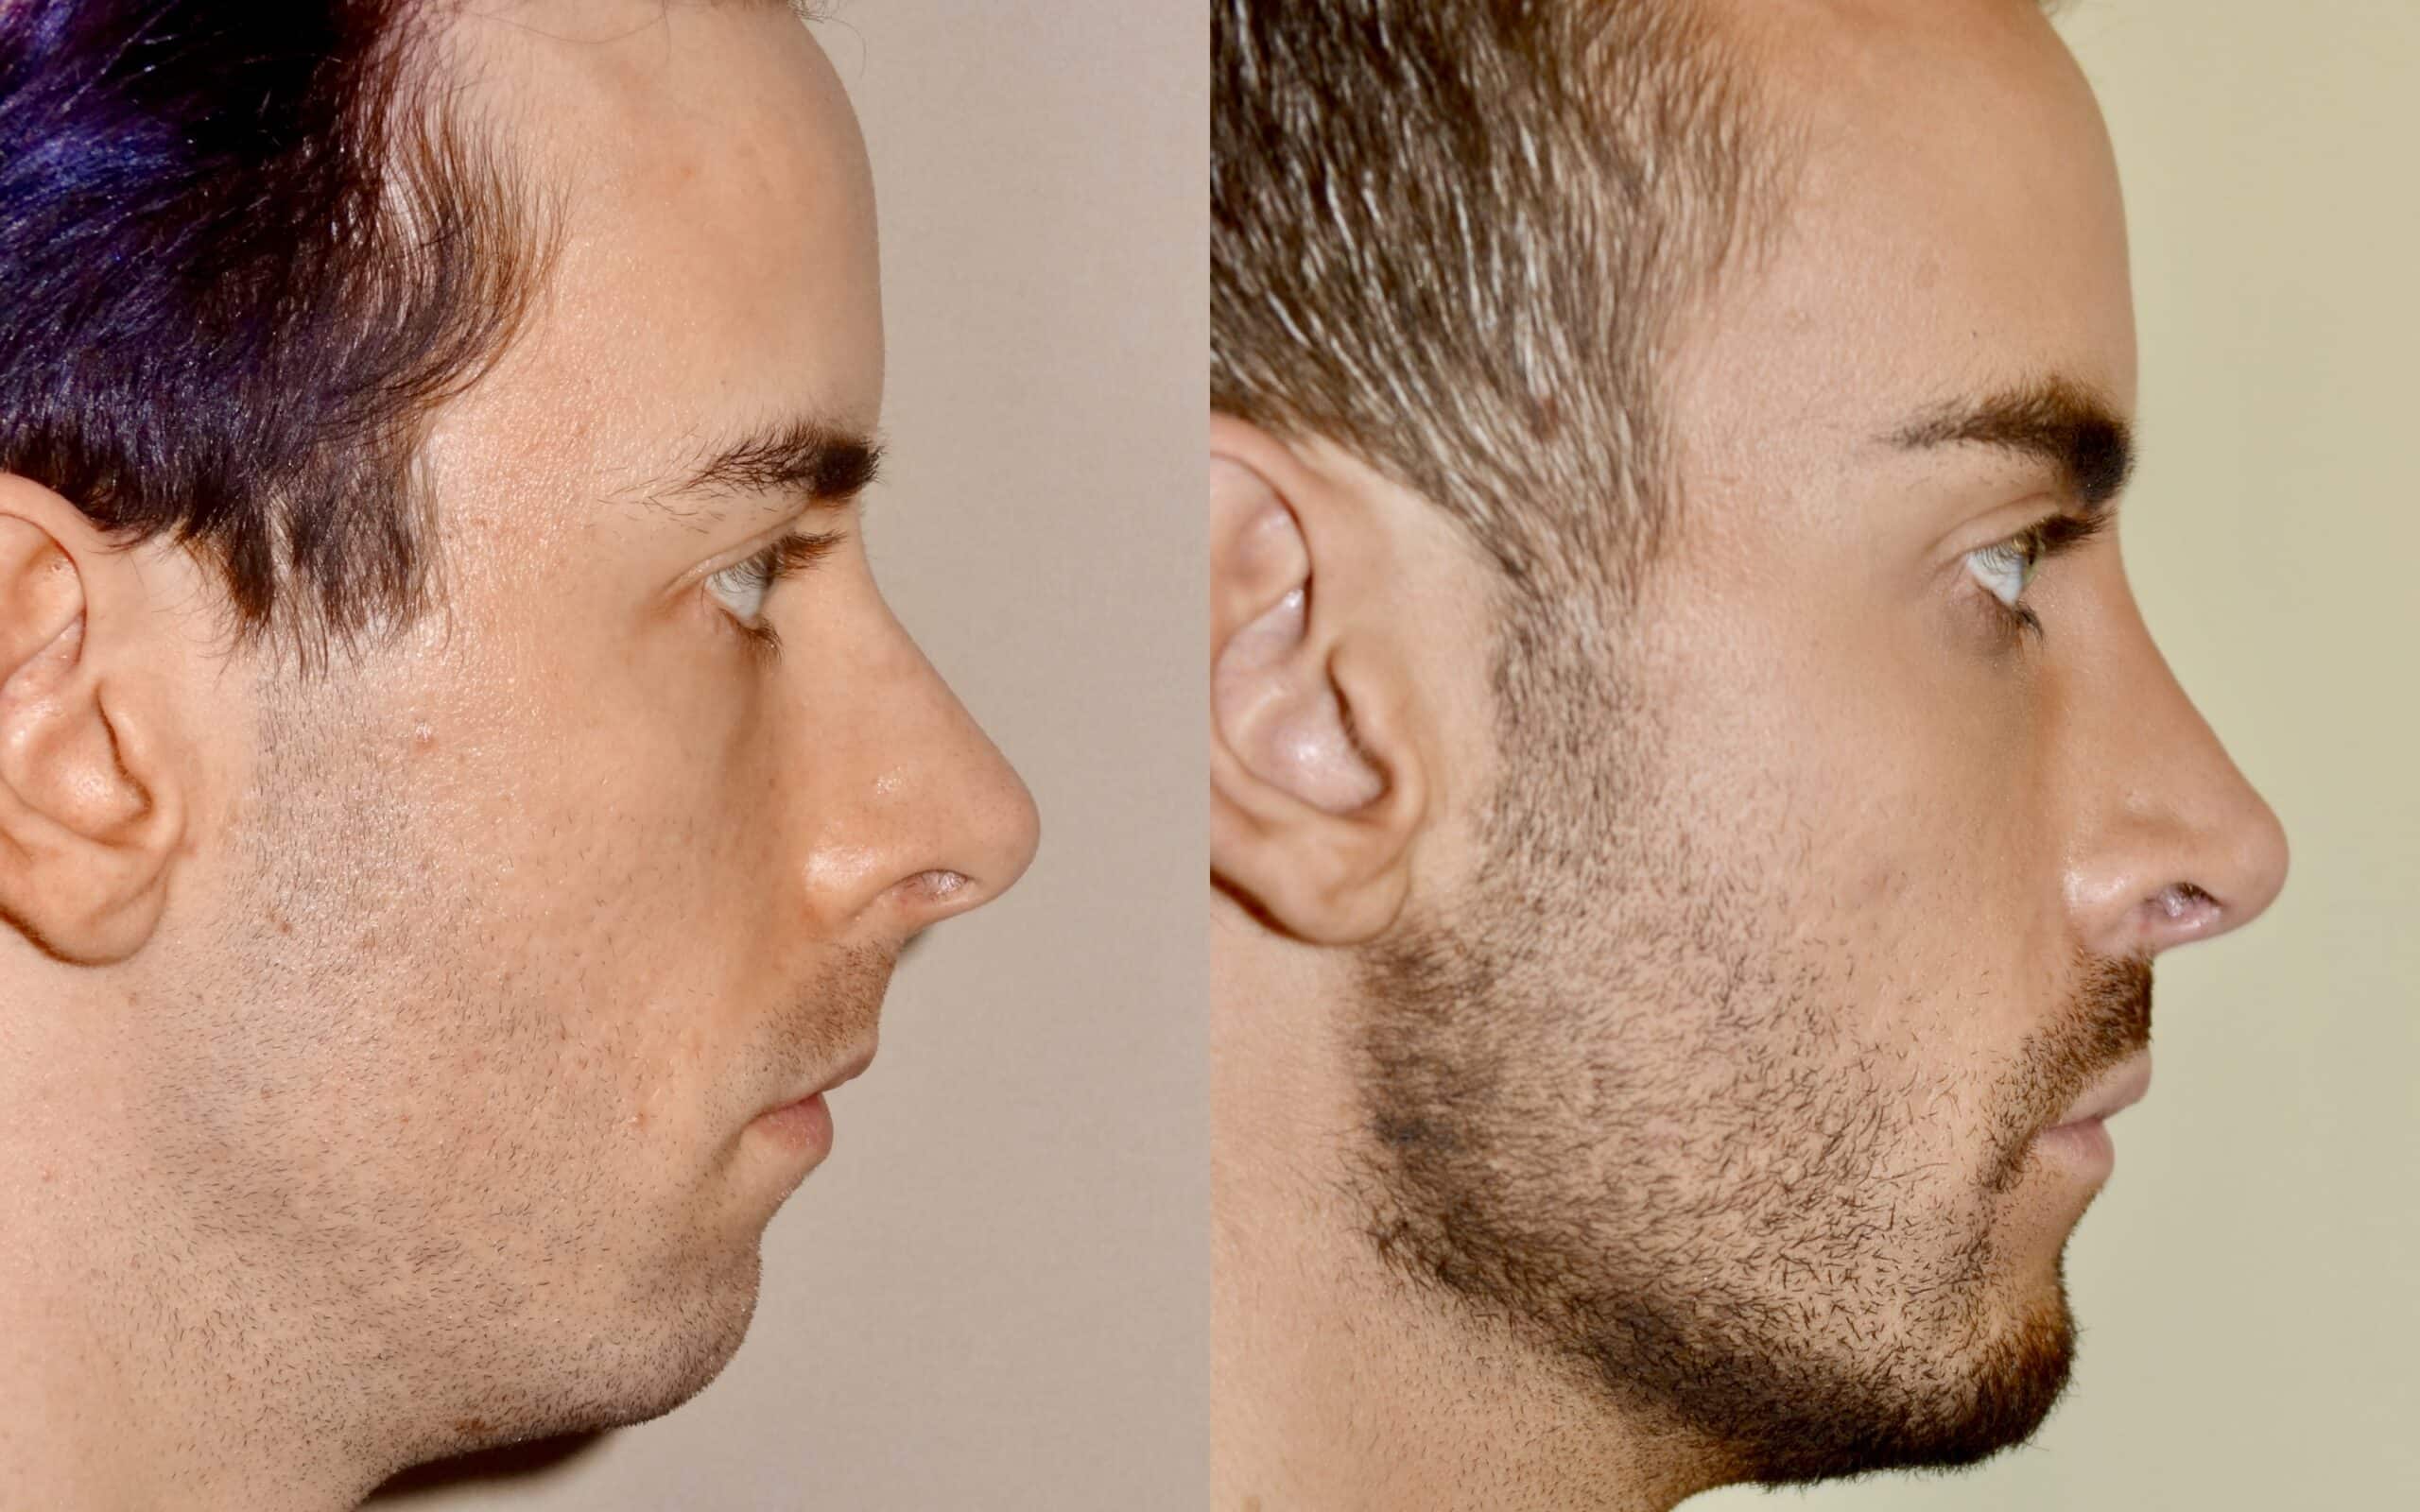 Chin implant before and after